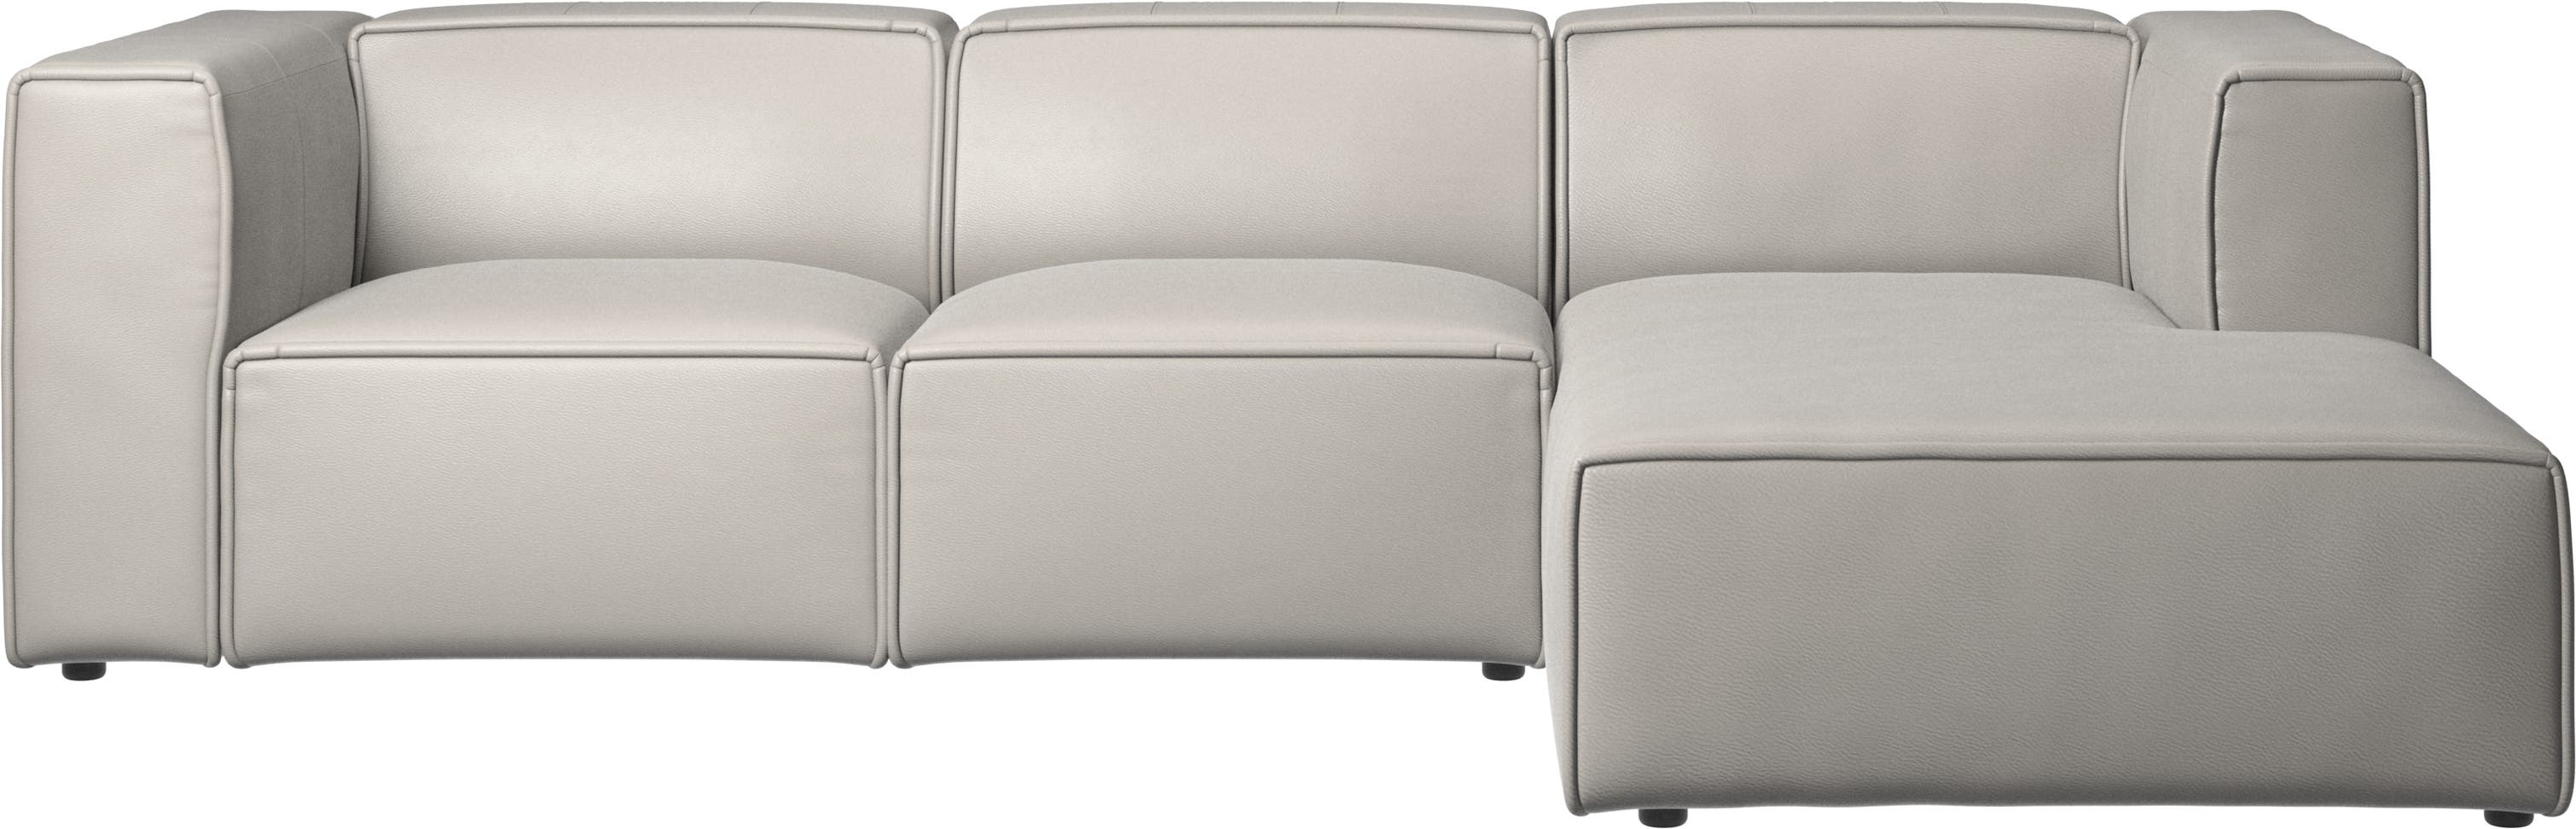 Carmo motion sofa with resting unit